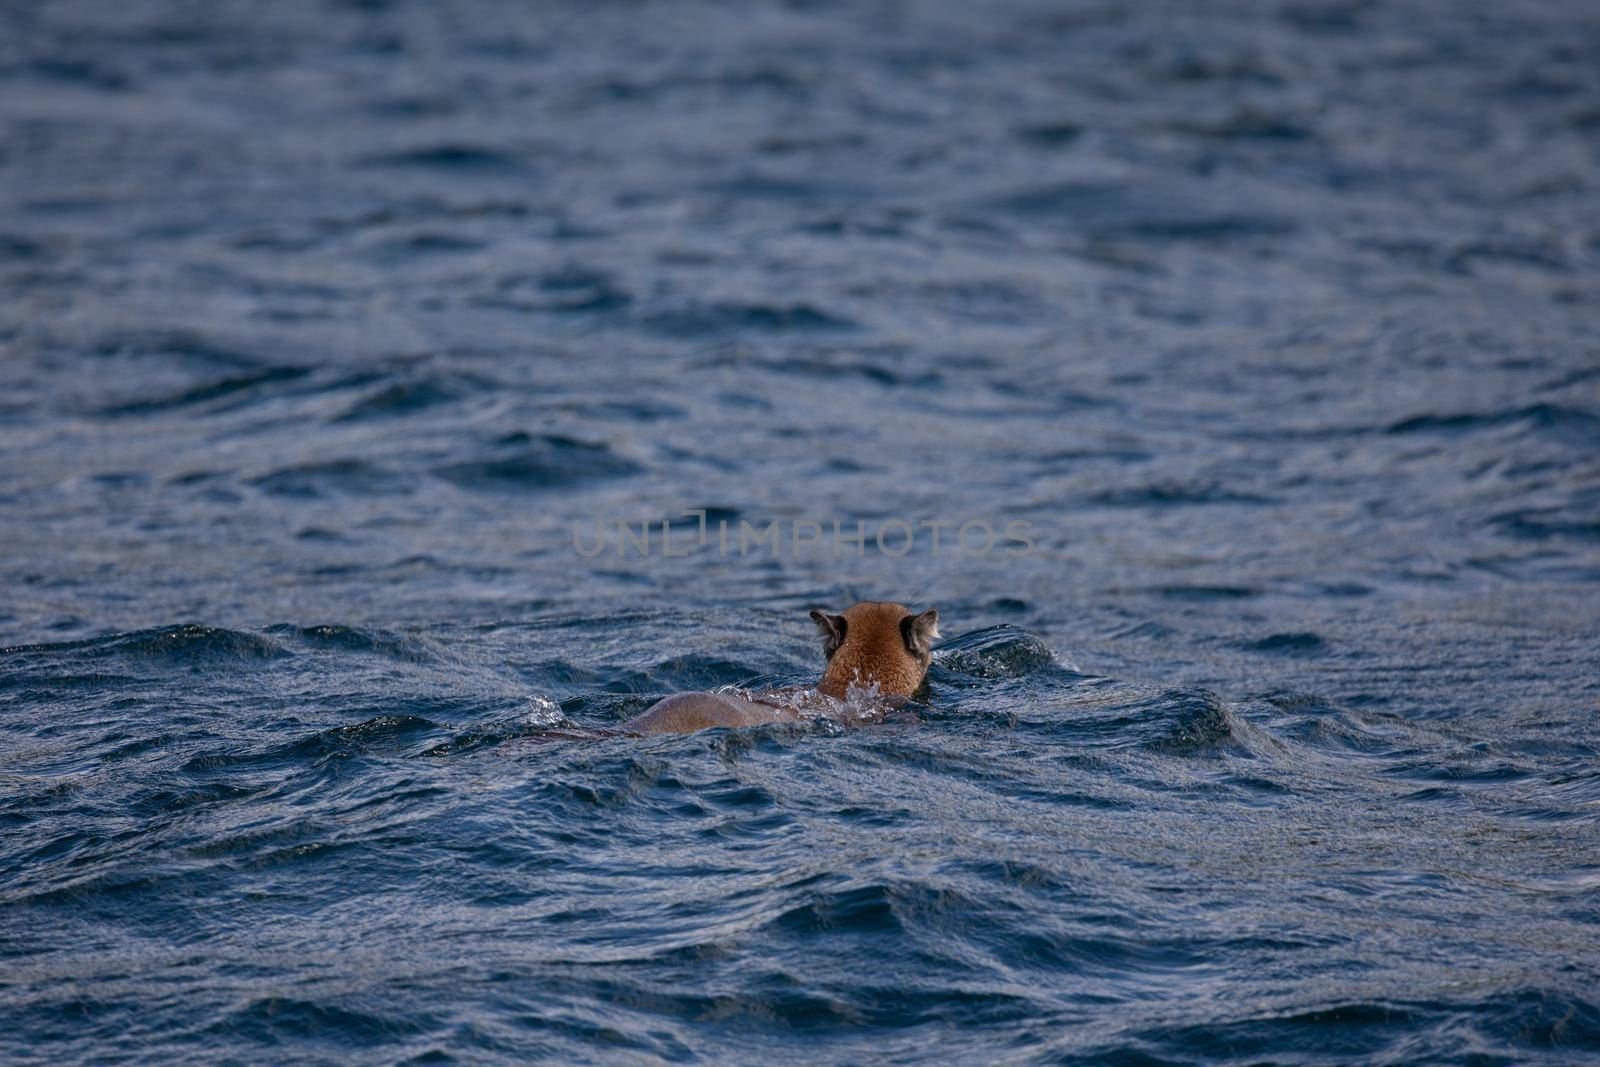 A cougar or mountain lion found swimming away in Chancellor Channel before coming into Johnstone Strait in British Columbia waters